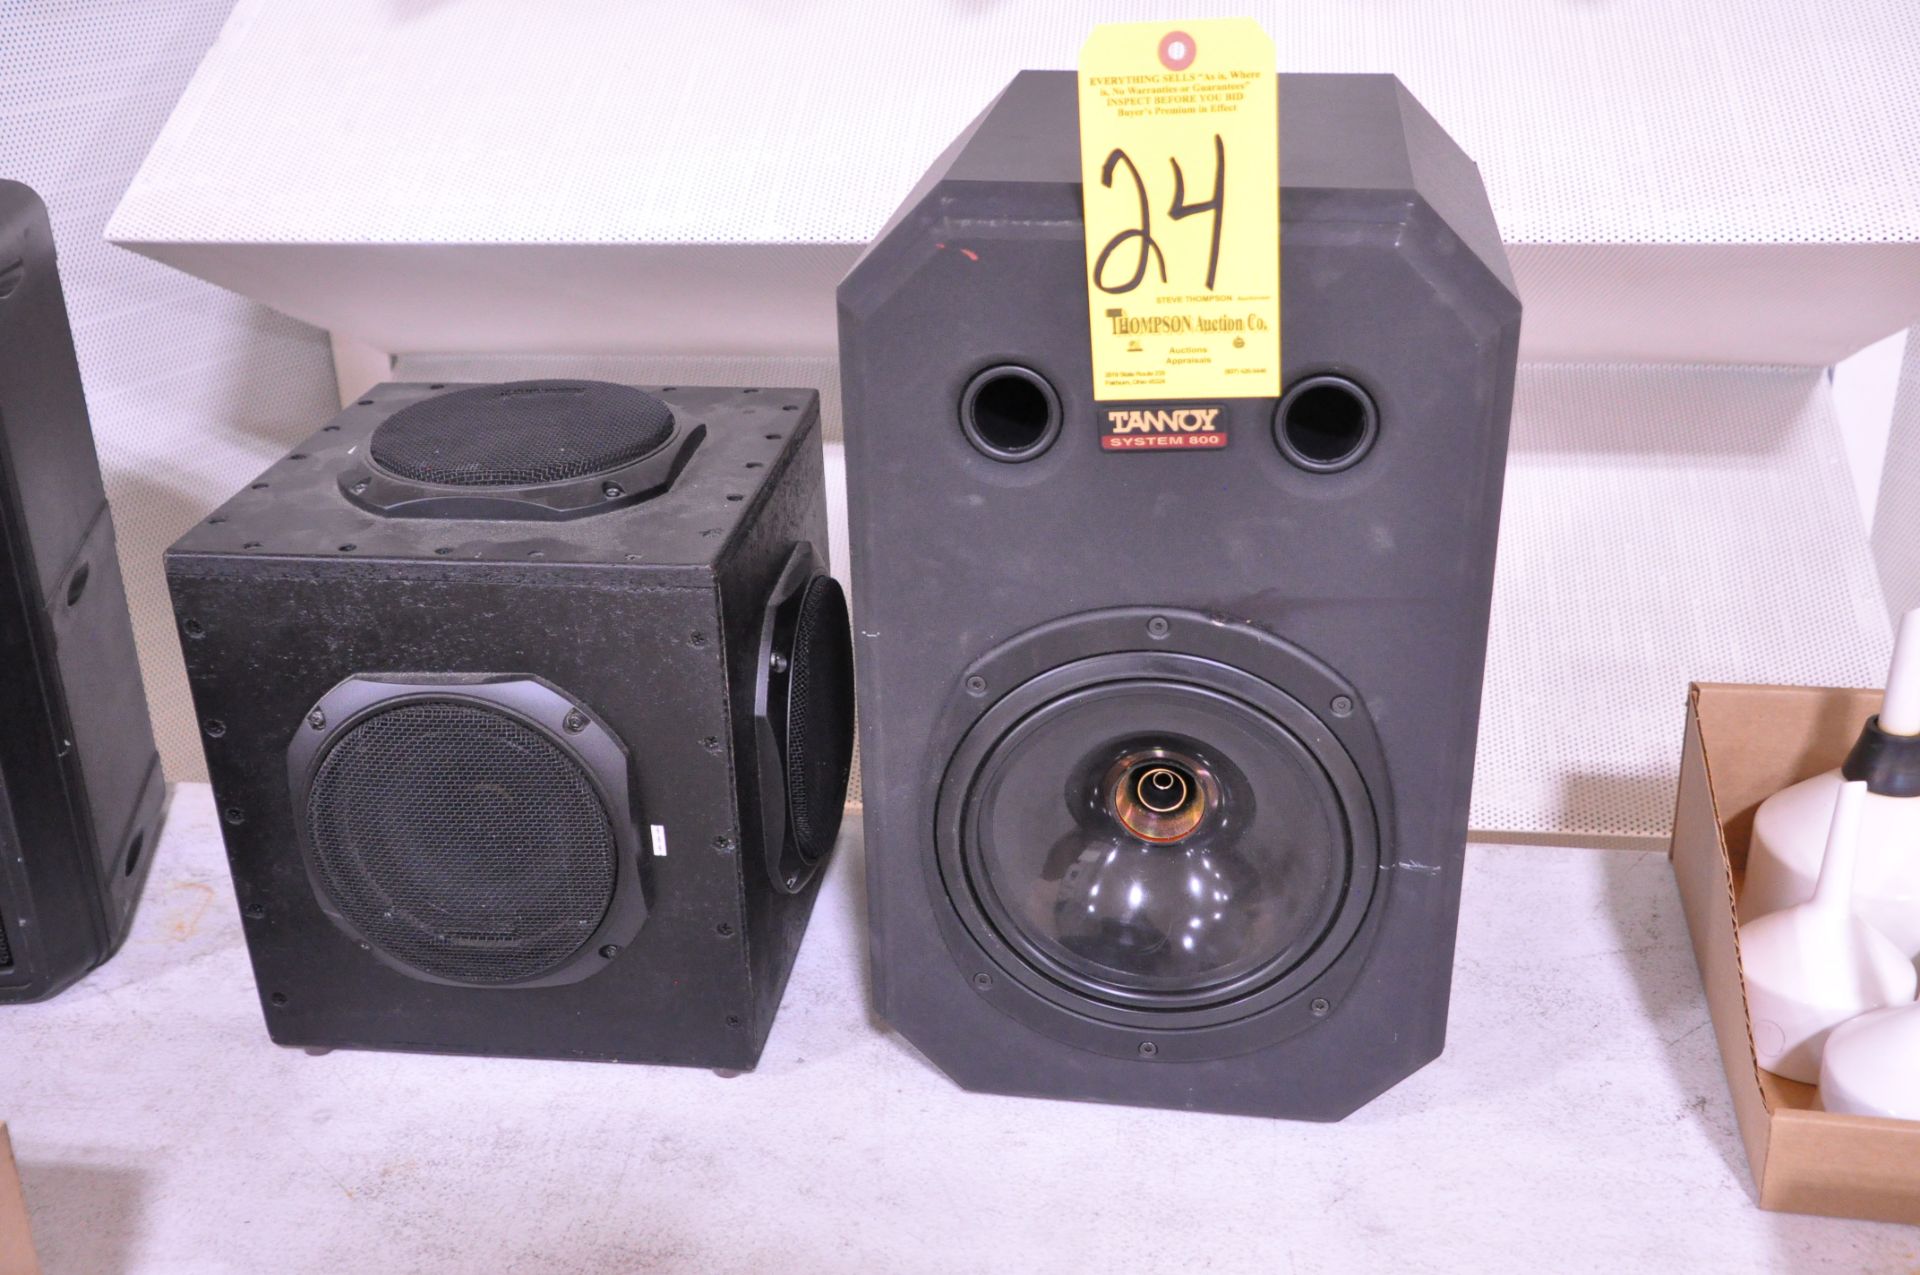 Tannoy System 800 8 in. 180-Watt Nearfield Monitor, S/n 240012S with 5-Way 6 in. Speaker